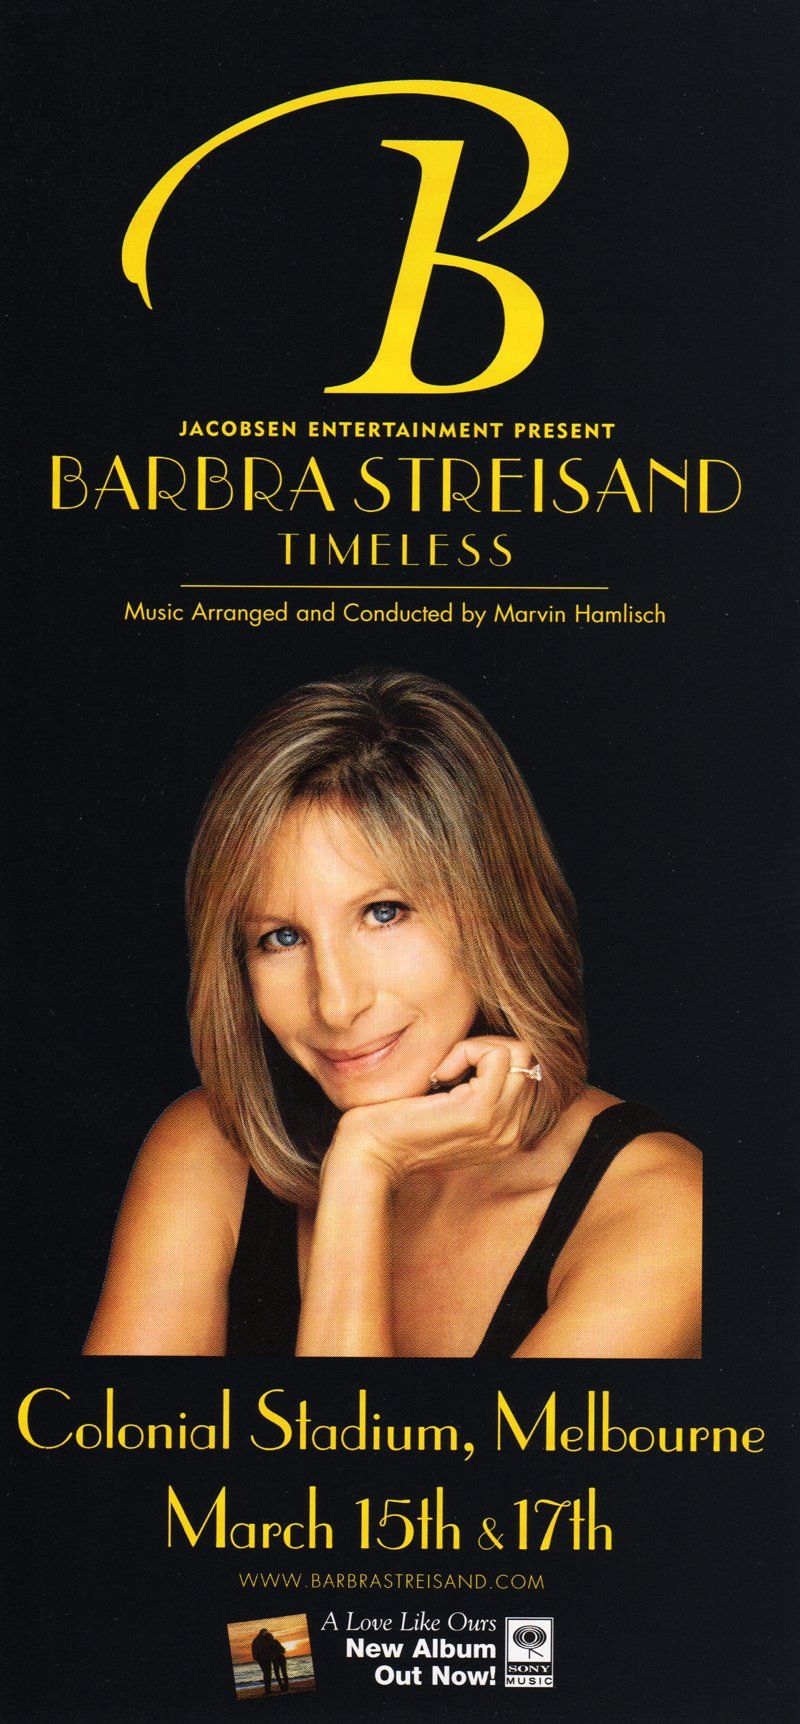 Advert for Streisand's concerts at Colonial Stadium, Melbourne.